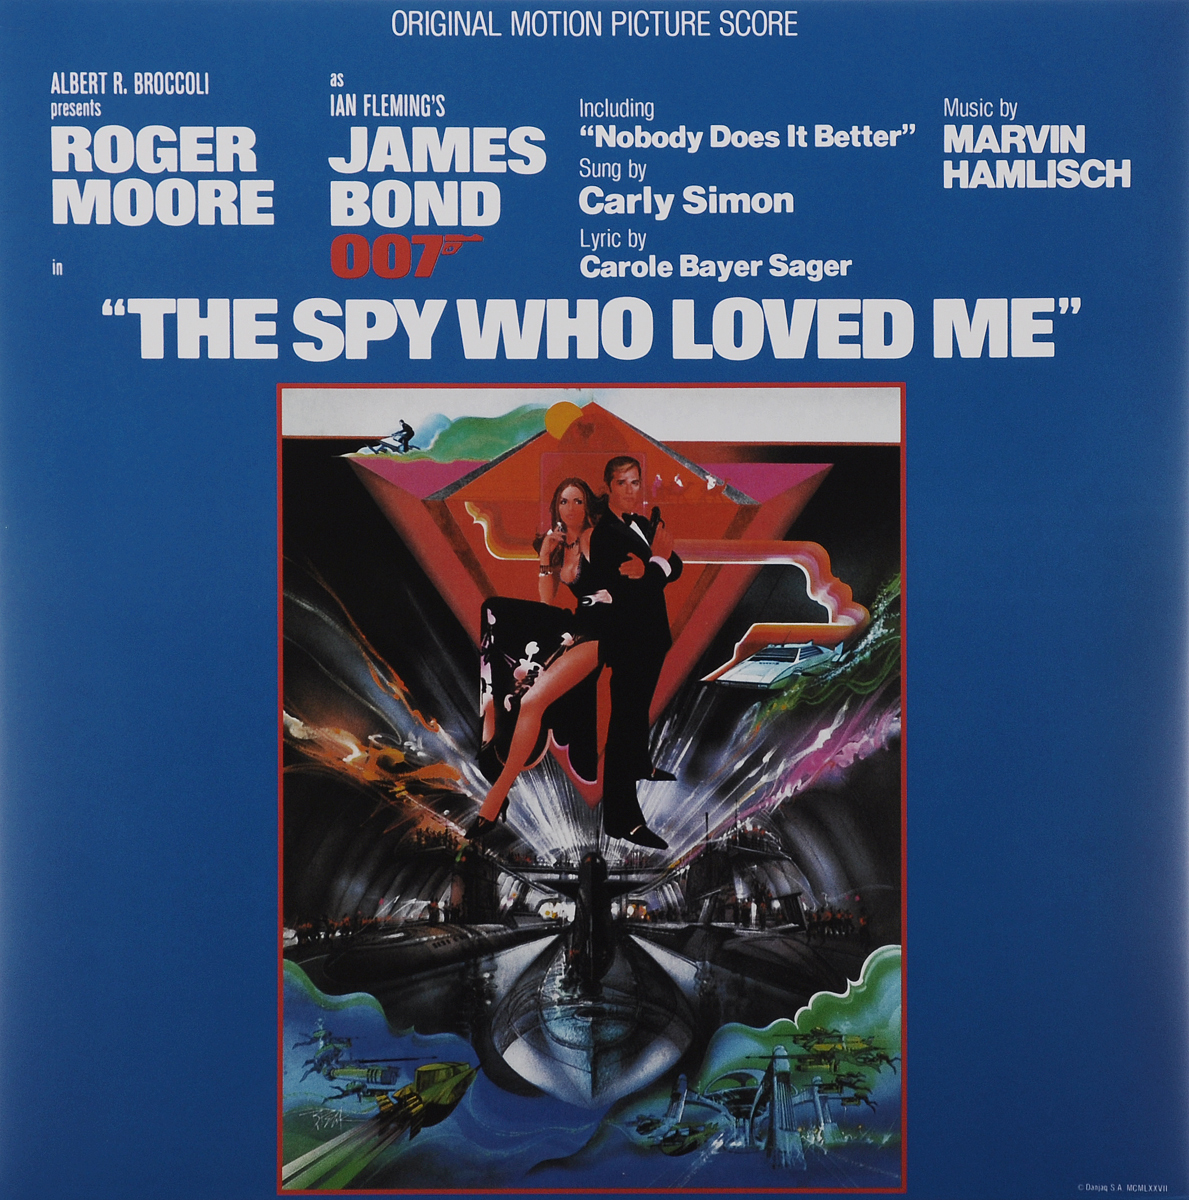 The Spy Who Loved Me. Original Motion Picture Score (LP)